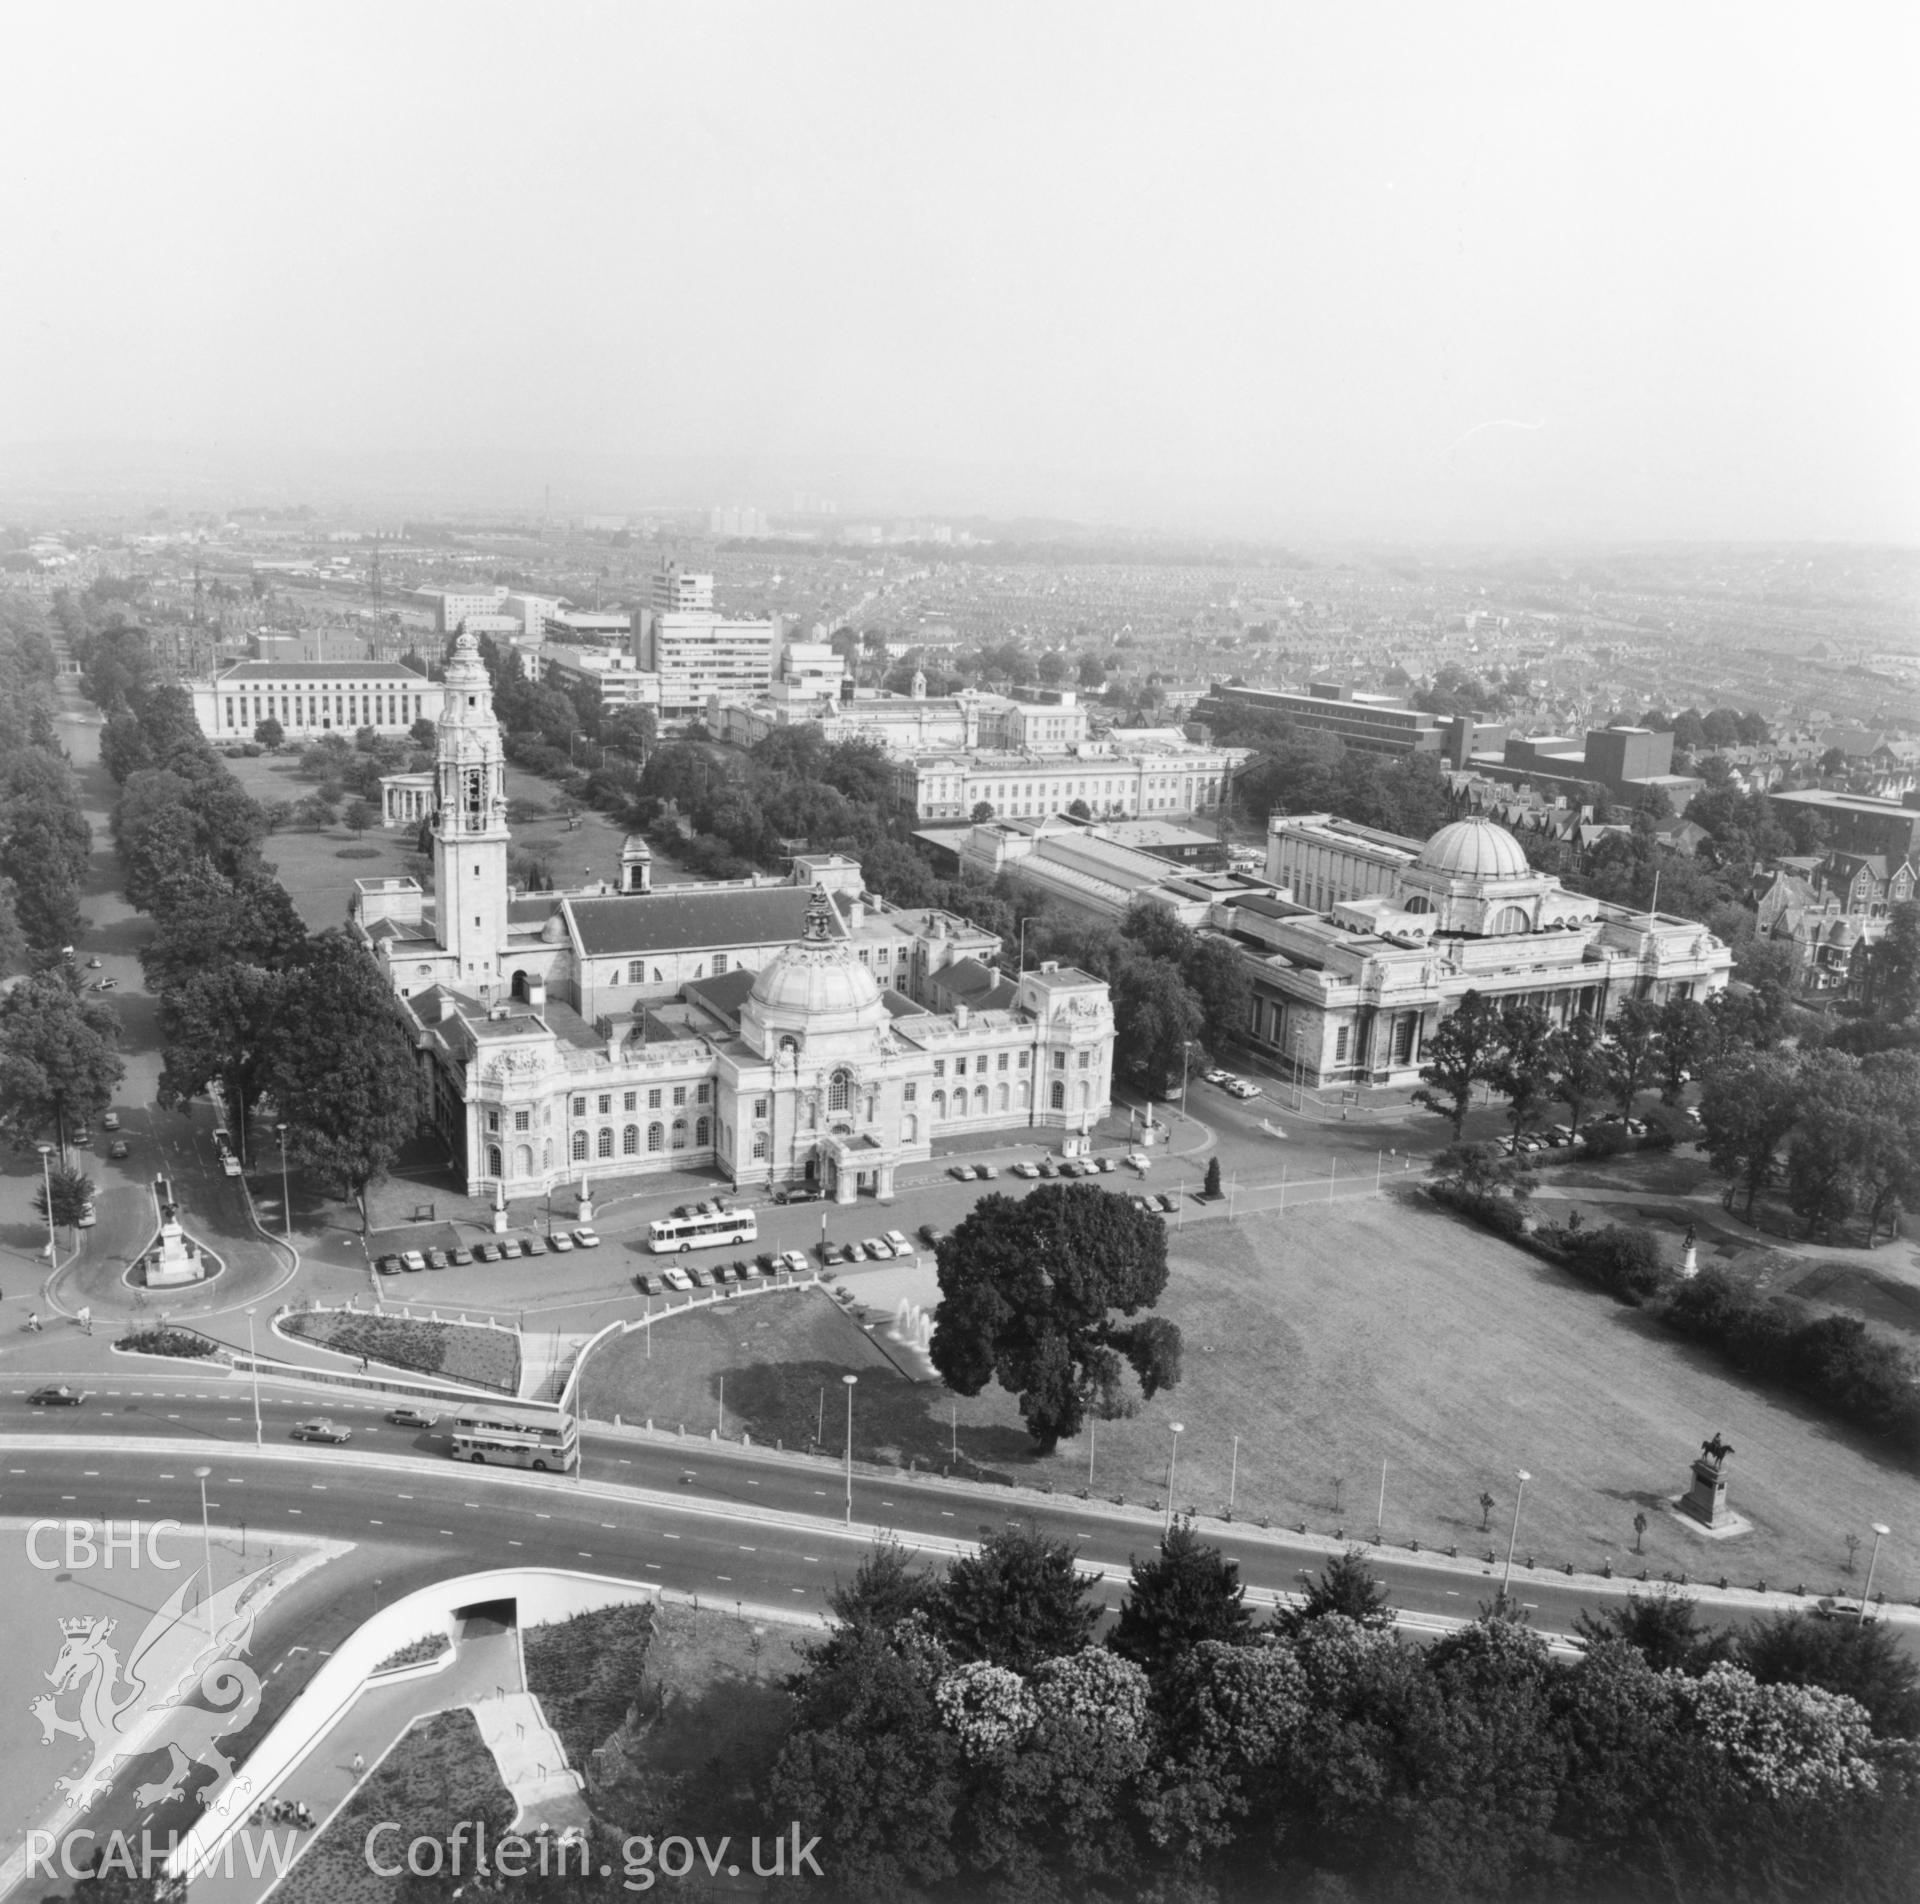 1 b/w print showing aerial oblique view of Cardiff City Hall; collated by the former Central Office of Information.